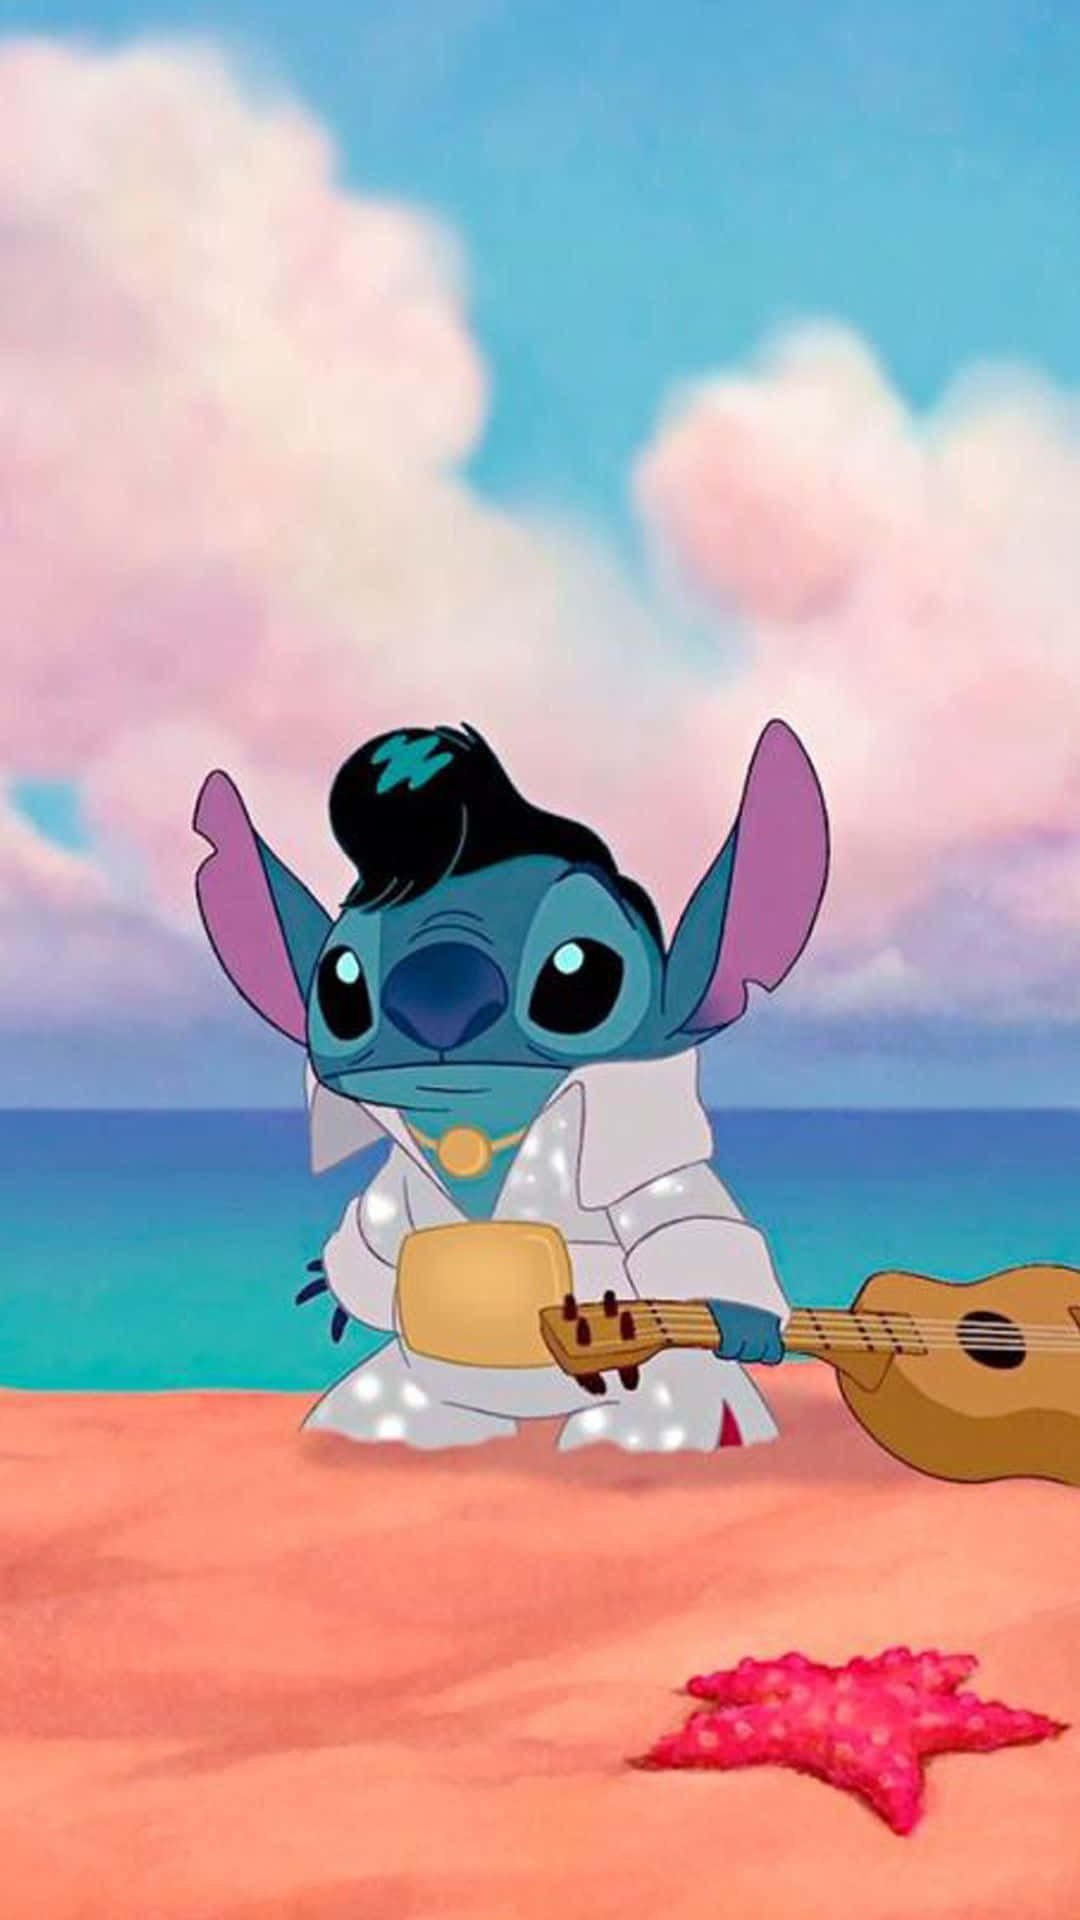 "The lovable duo, Lilo and Stitch, hanging out together on a warm day."